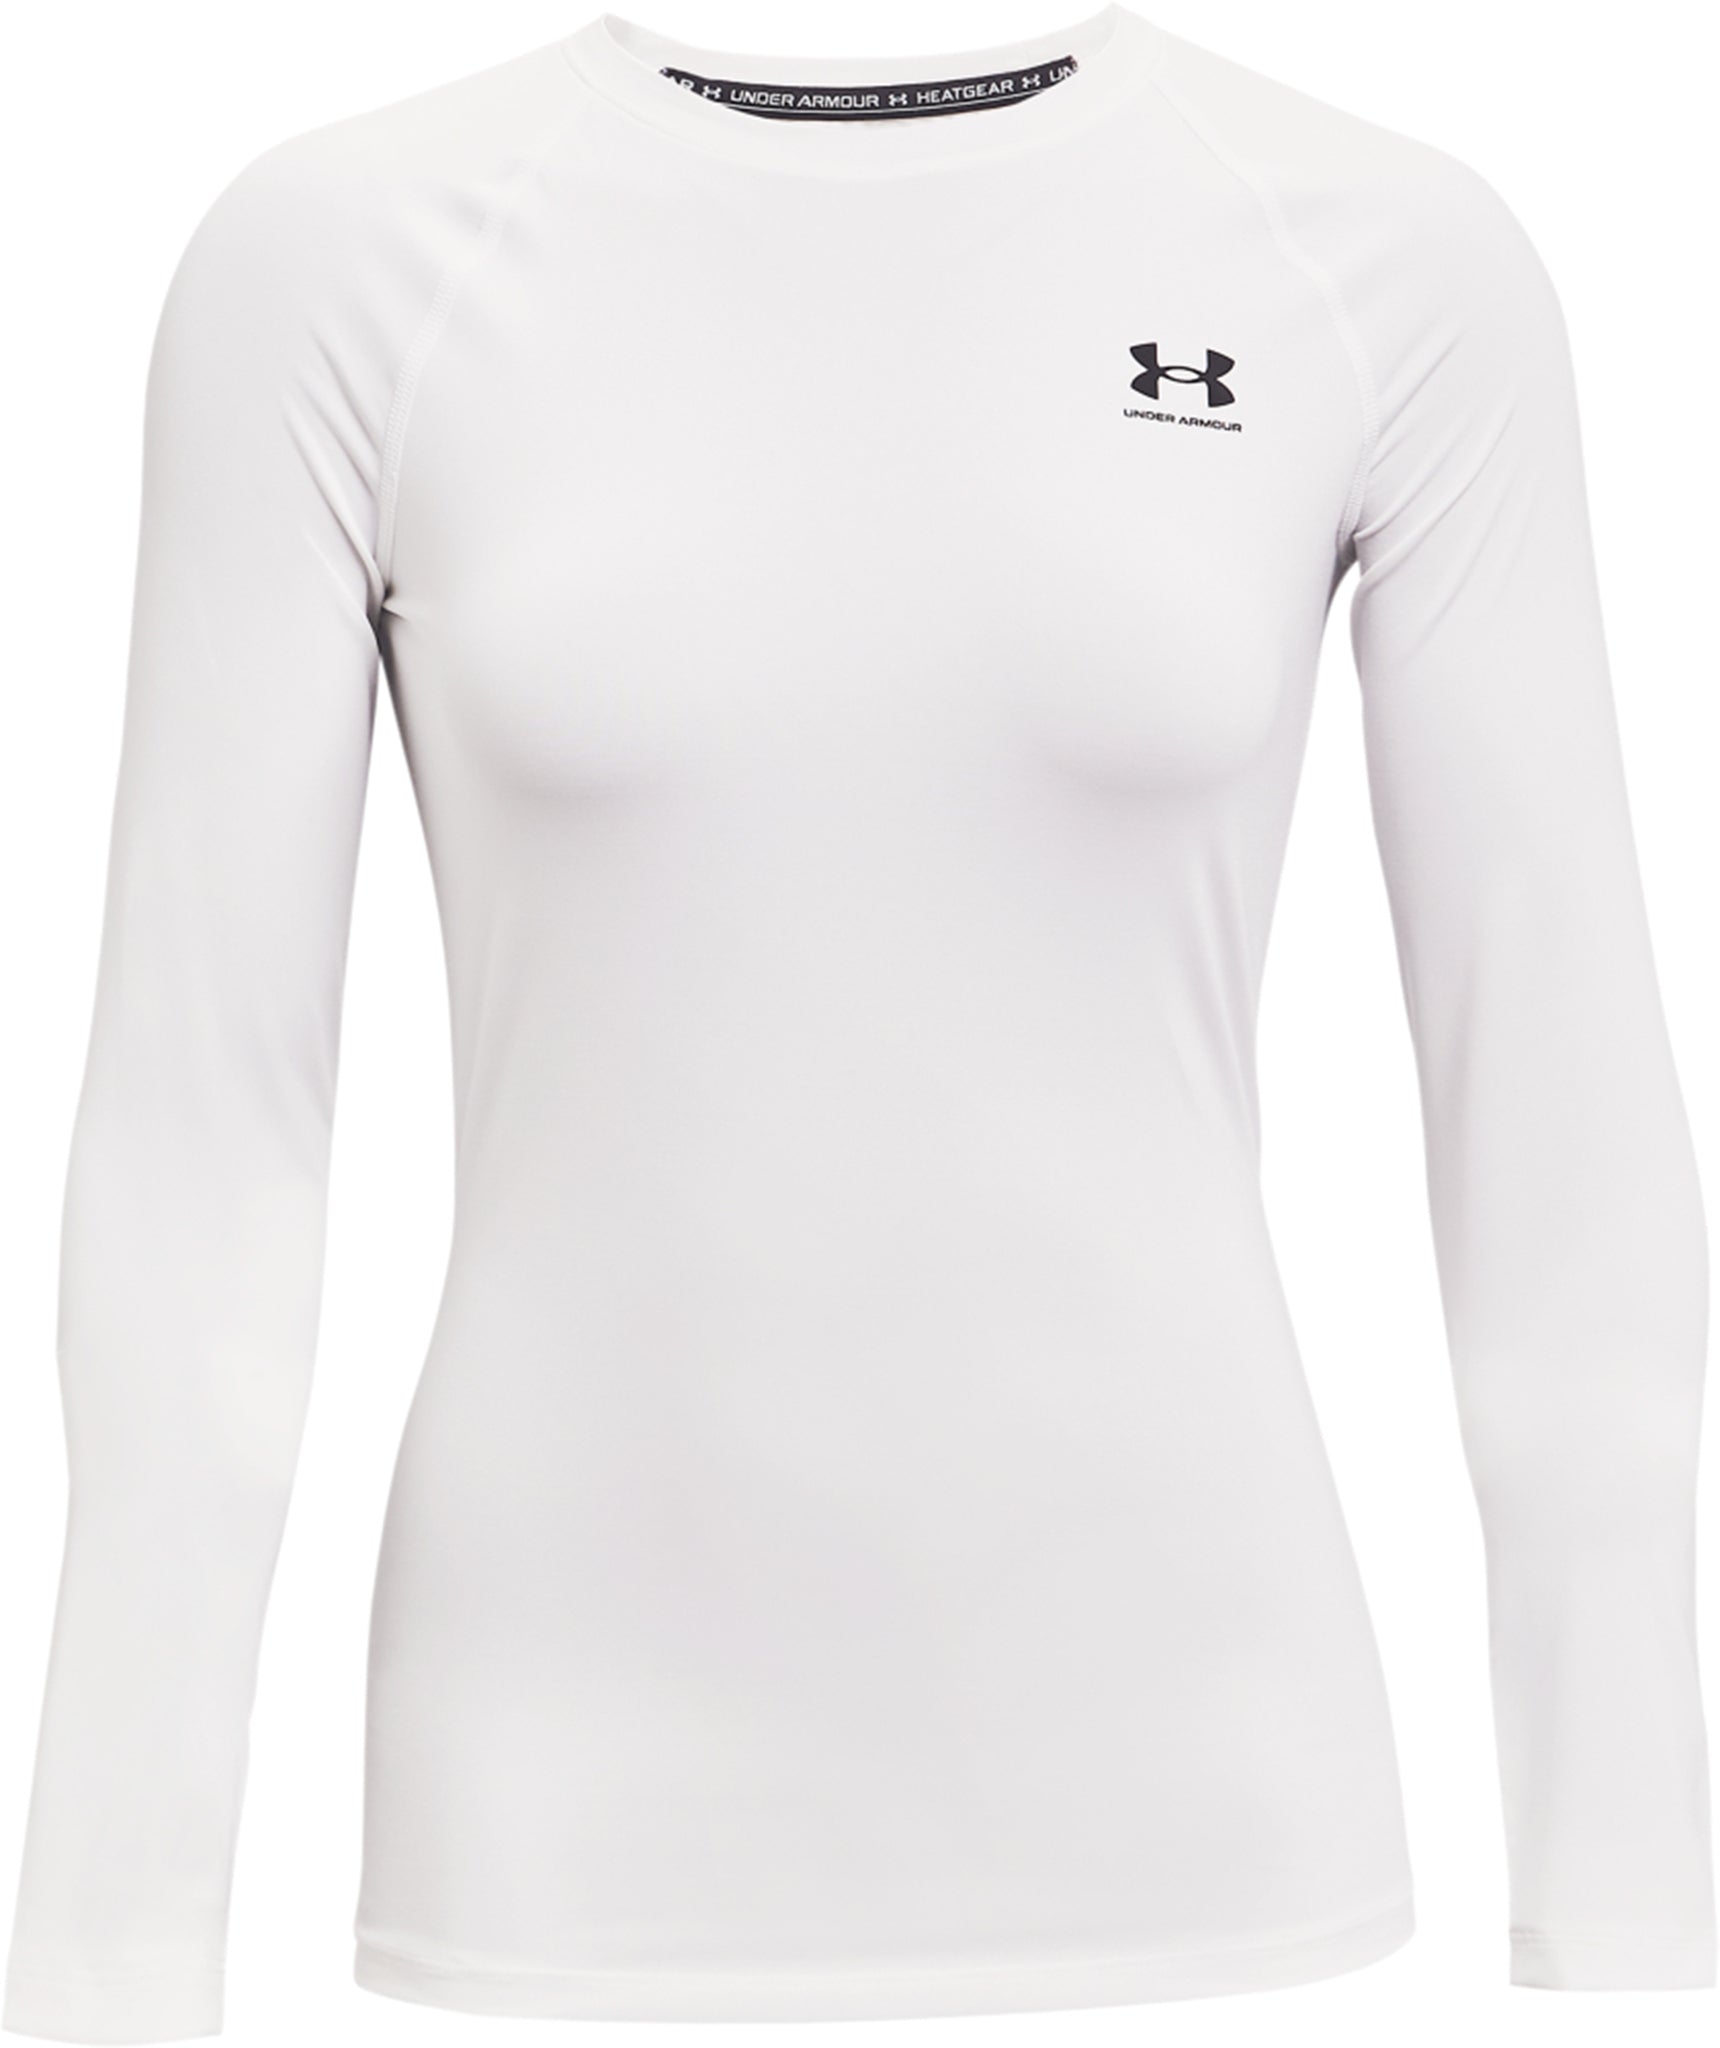 Women's Baselayers and Compression Tops